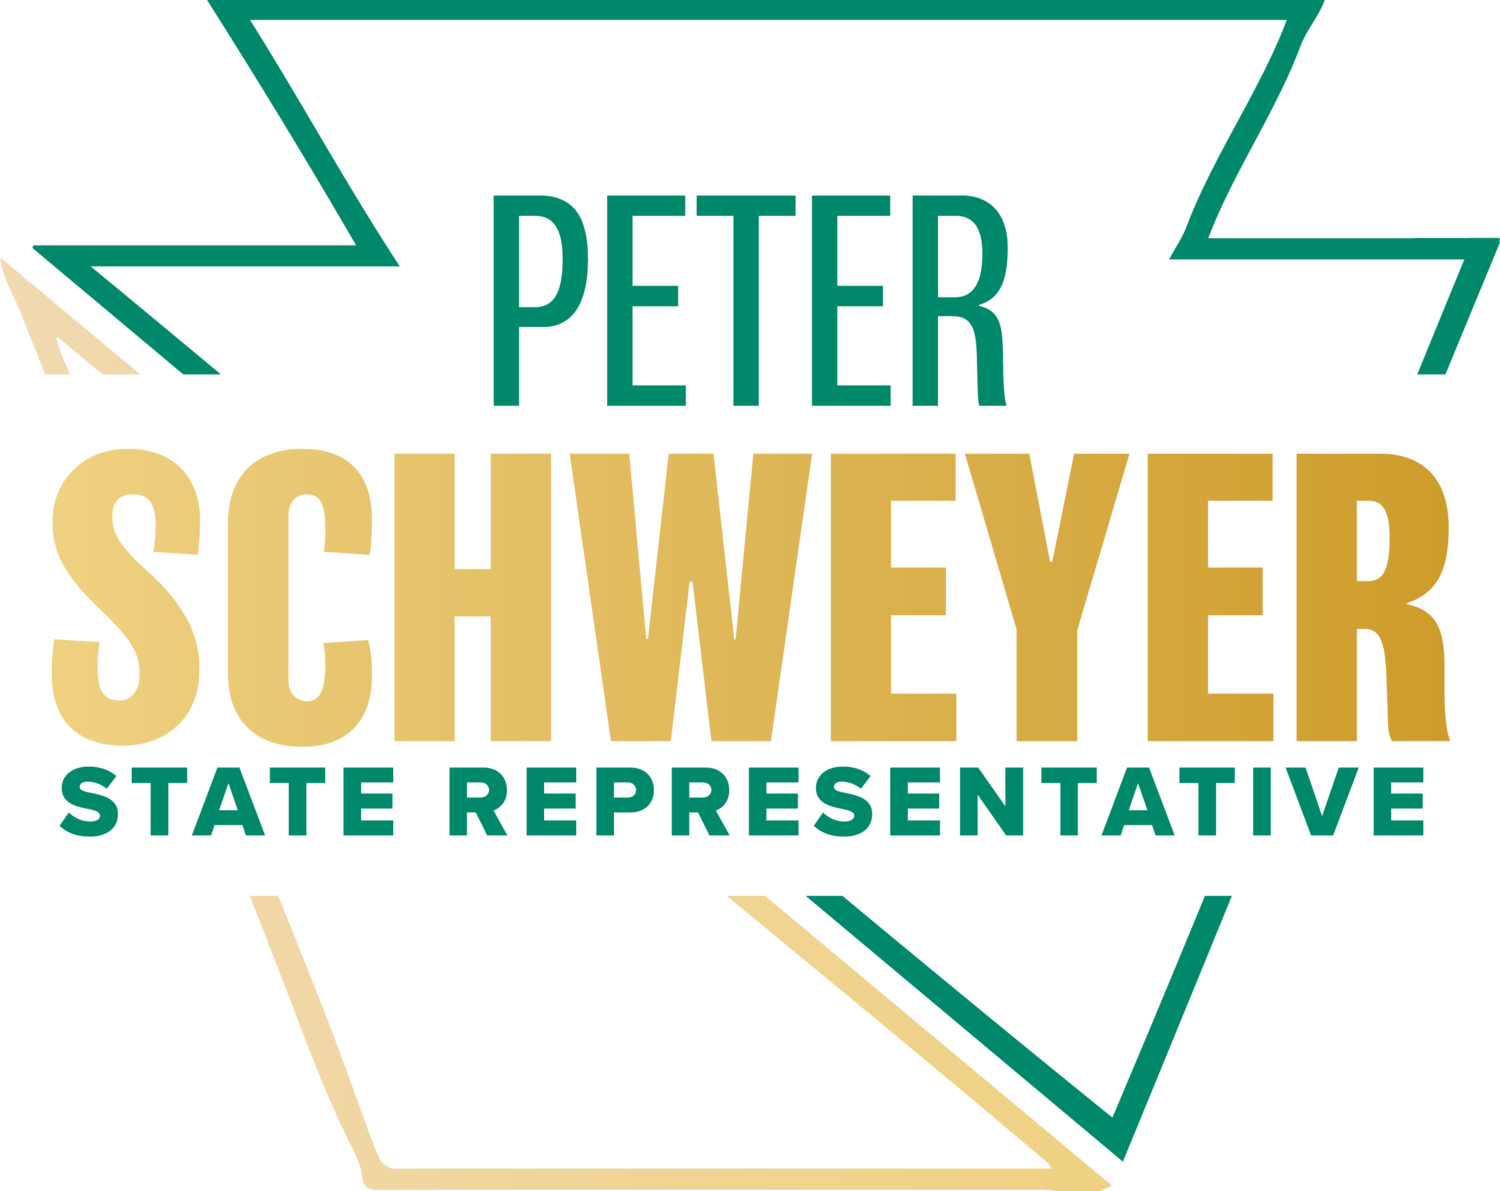 Peter Schweyer - Working For Our Community